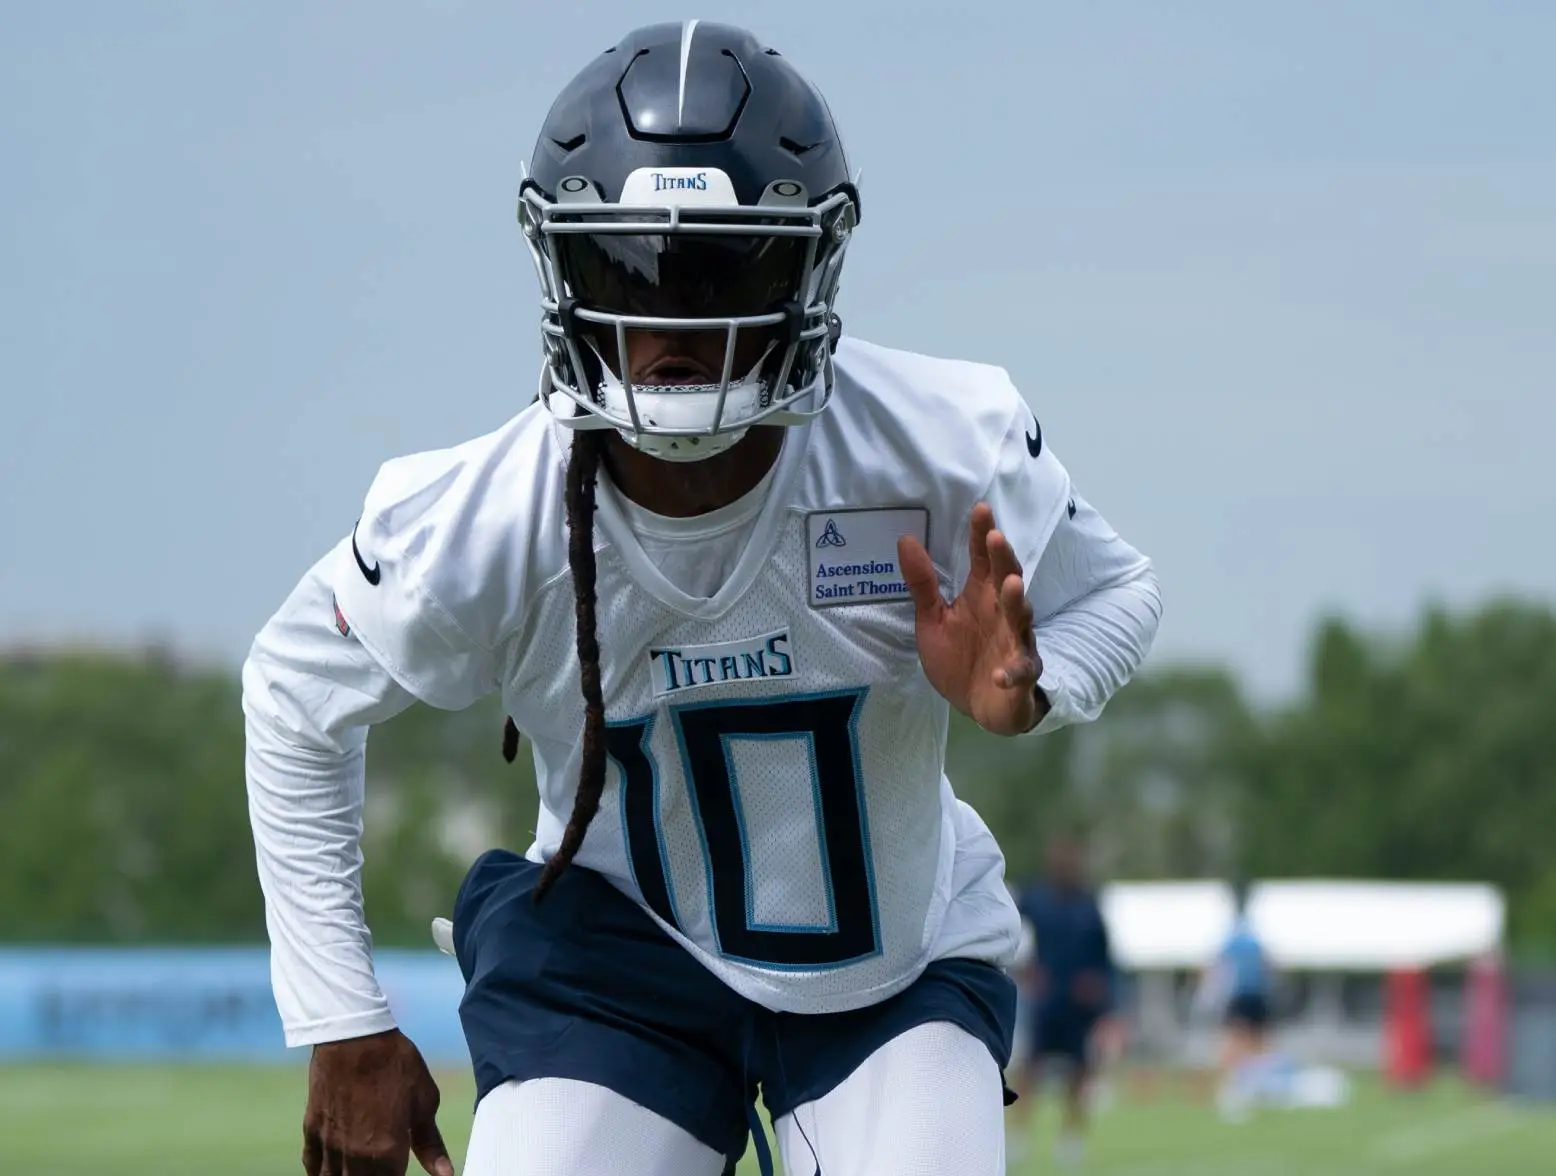 July 26, 2023; Nashville, TN, USA; Tennessee Titans newly acquired wide receiver DeAndre Hopkins (10) runs through drills during the first day of training camp at the practice facility St. Thomas Sports Park. Credit: Denny Simmons - USA Today Sports Network via The Tennessean